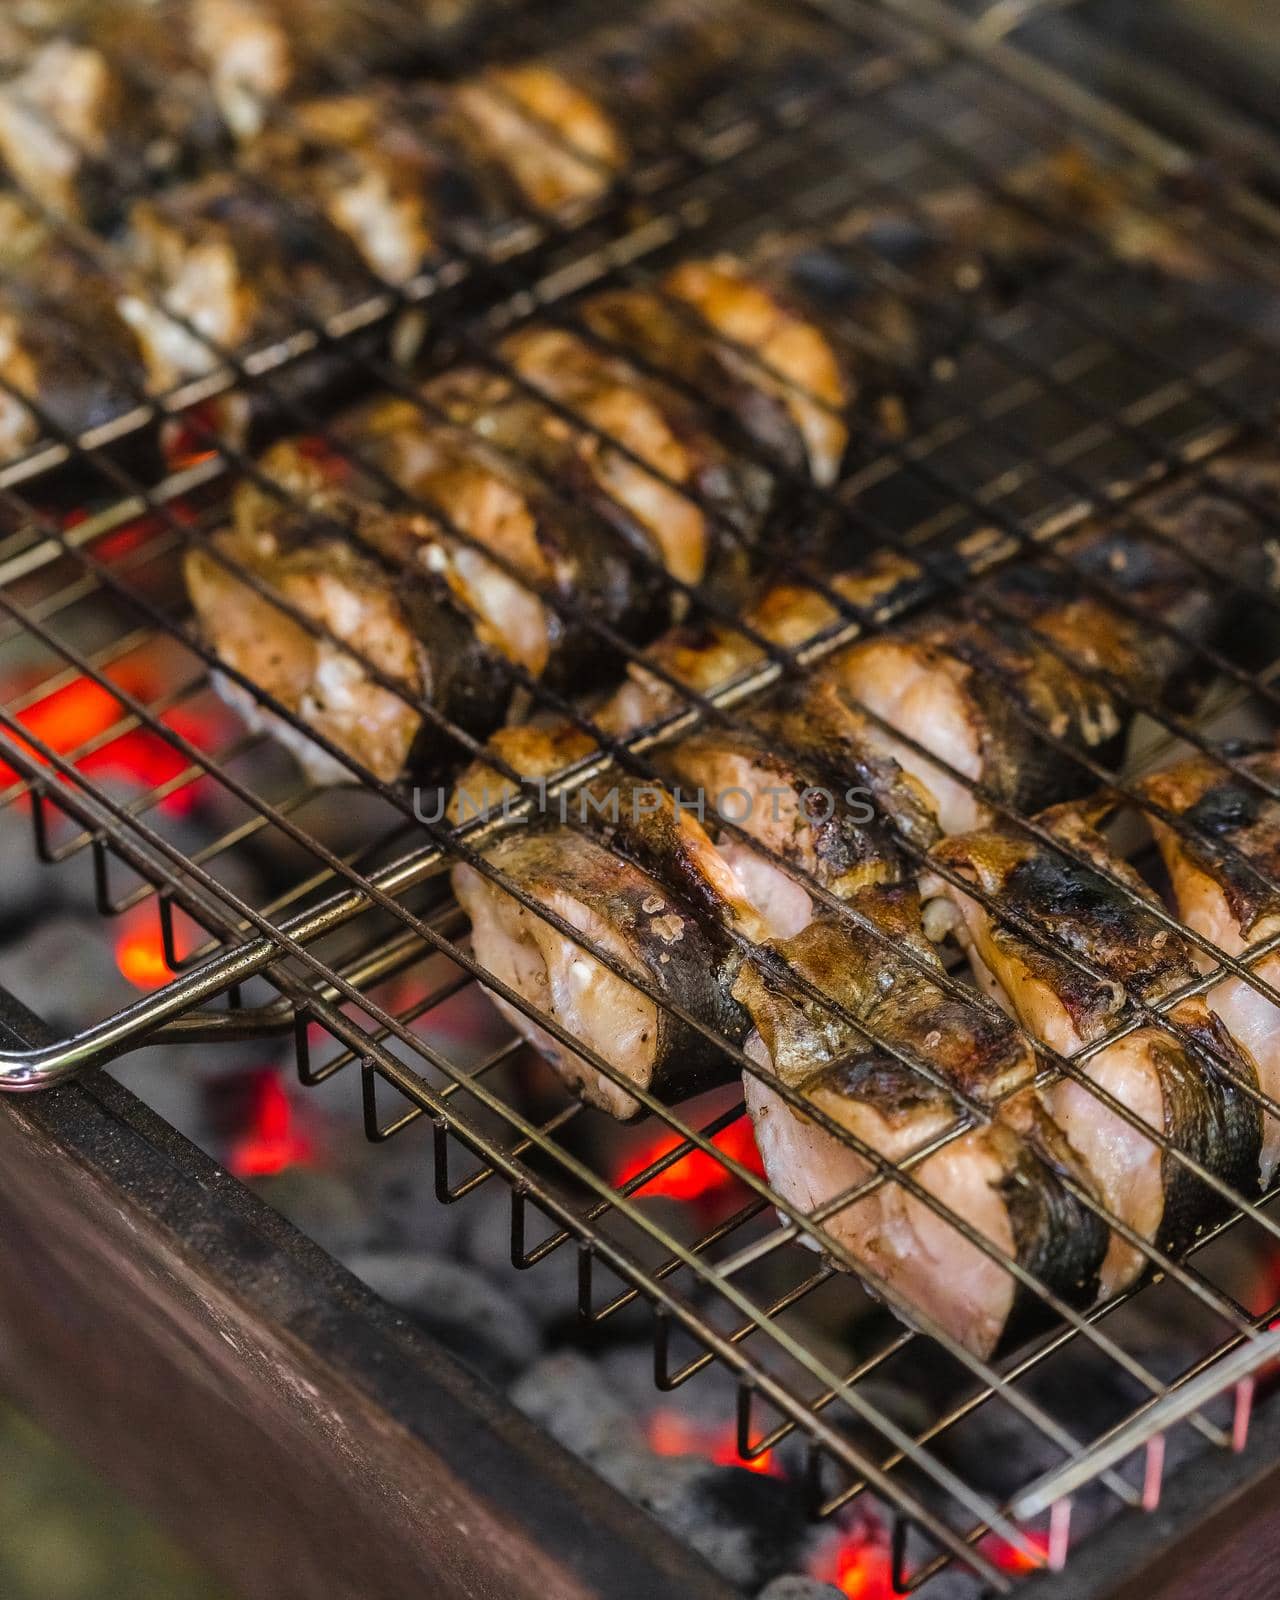 Fried trout fish on charcoal grill. Roasted fish pieces on fire.